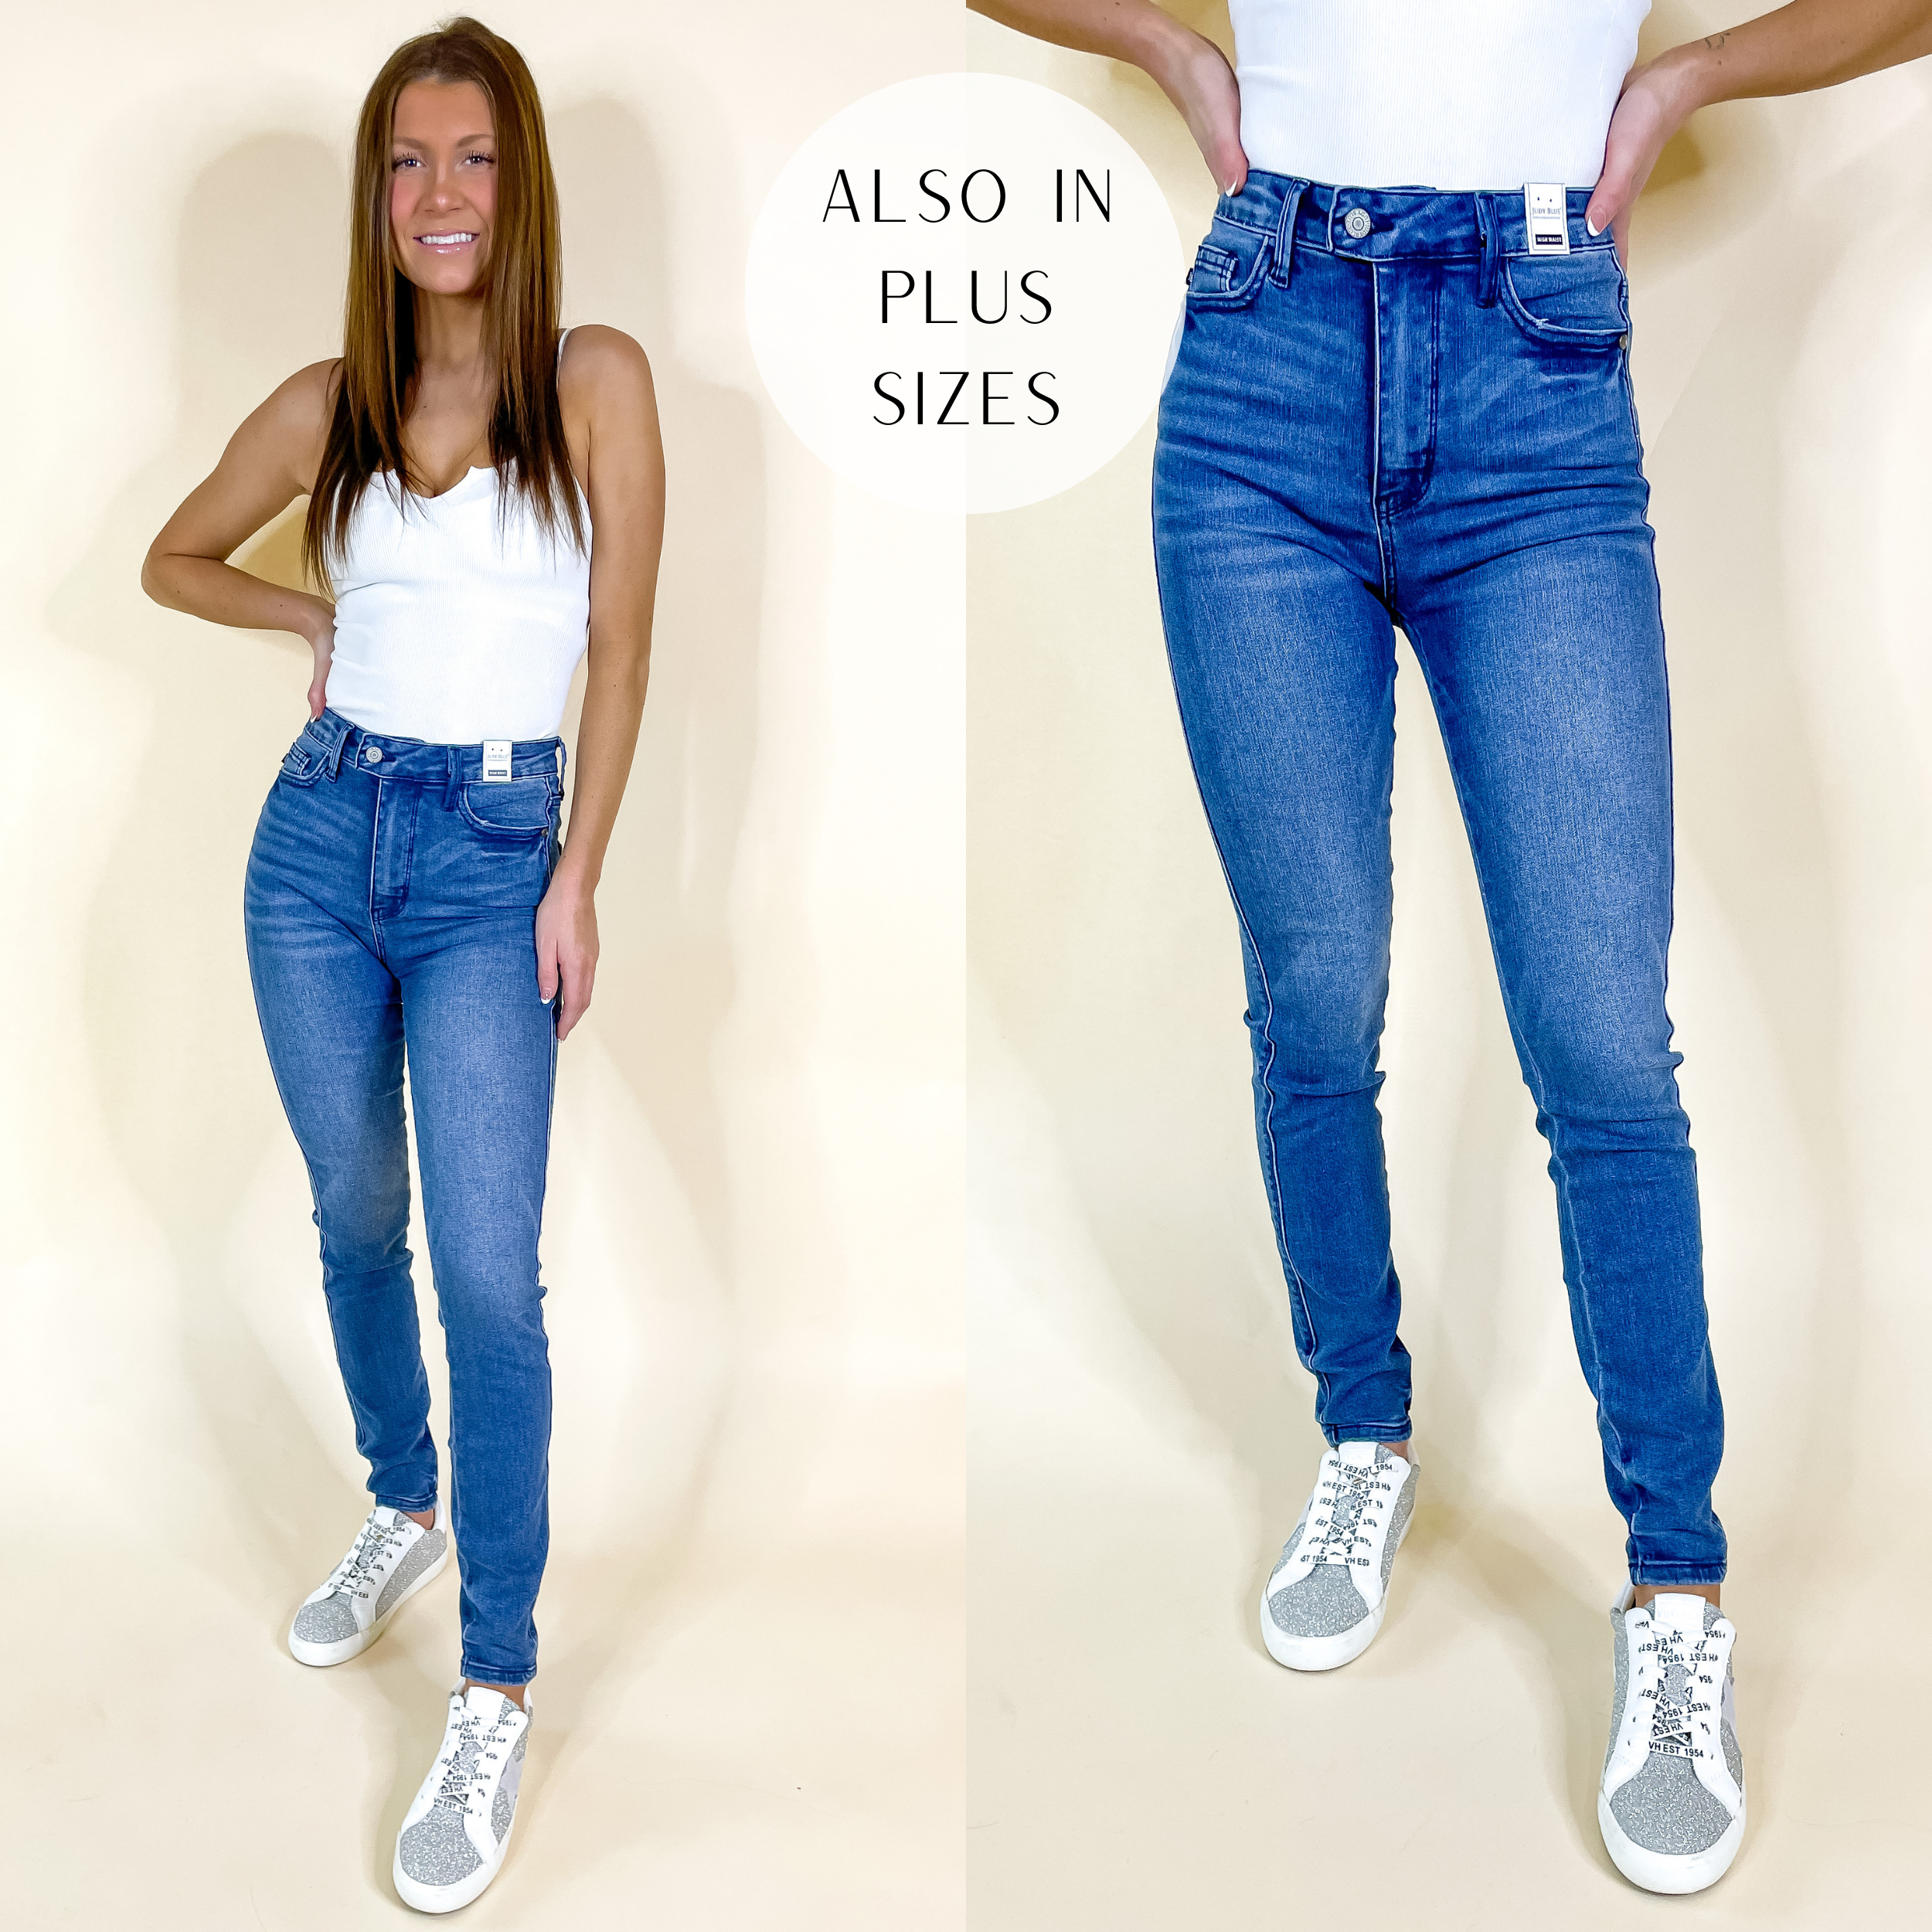 Model is wearing a pair of cool-medium wash skinny jeans. Model has these jeans paired with a white tank top and white sneakers.